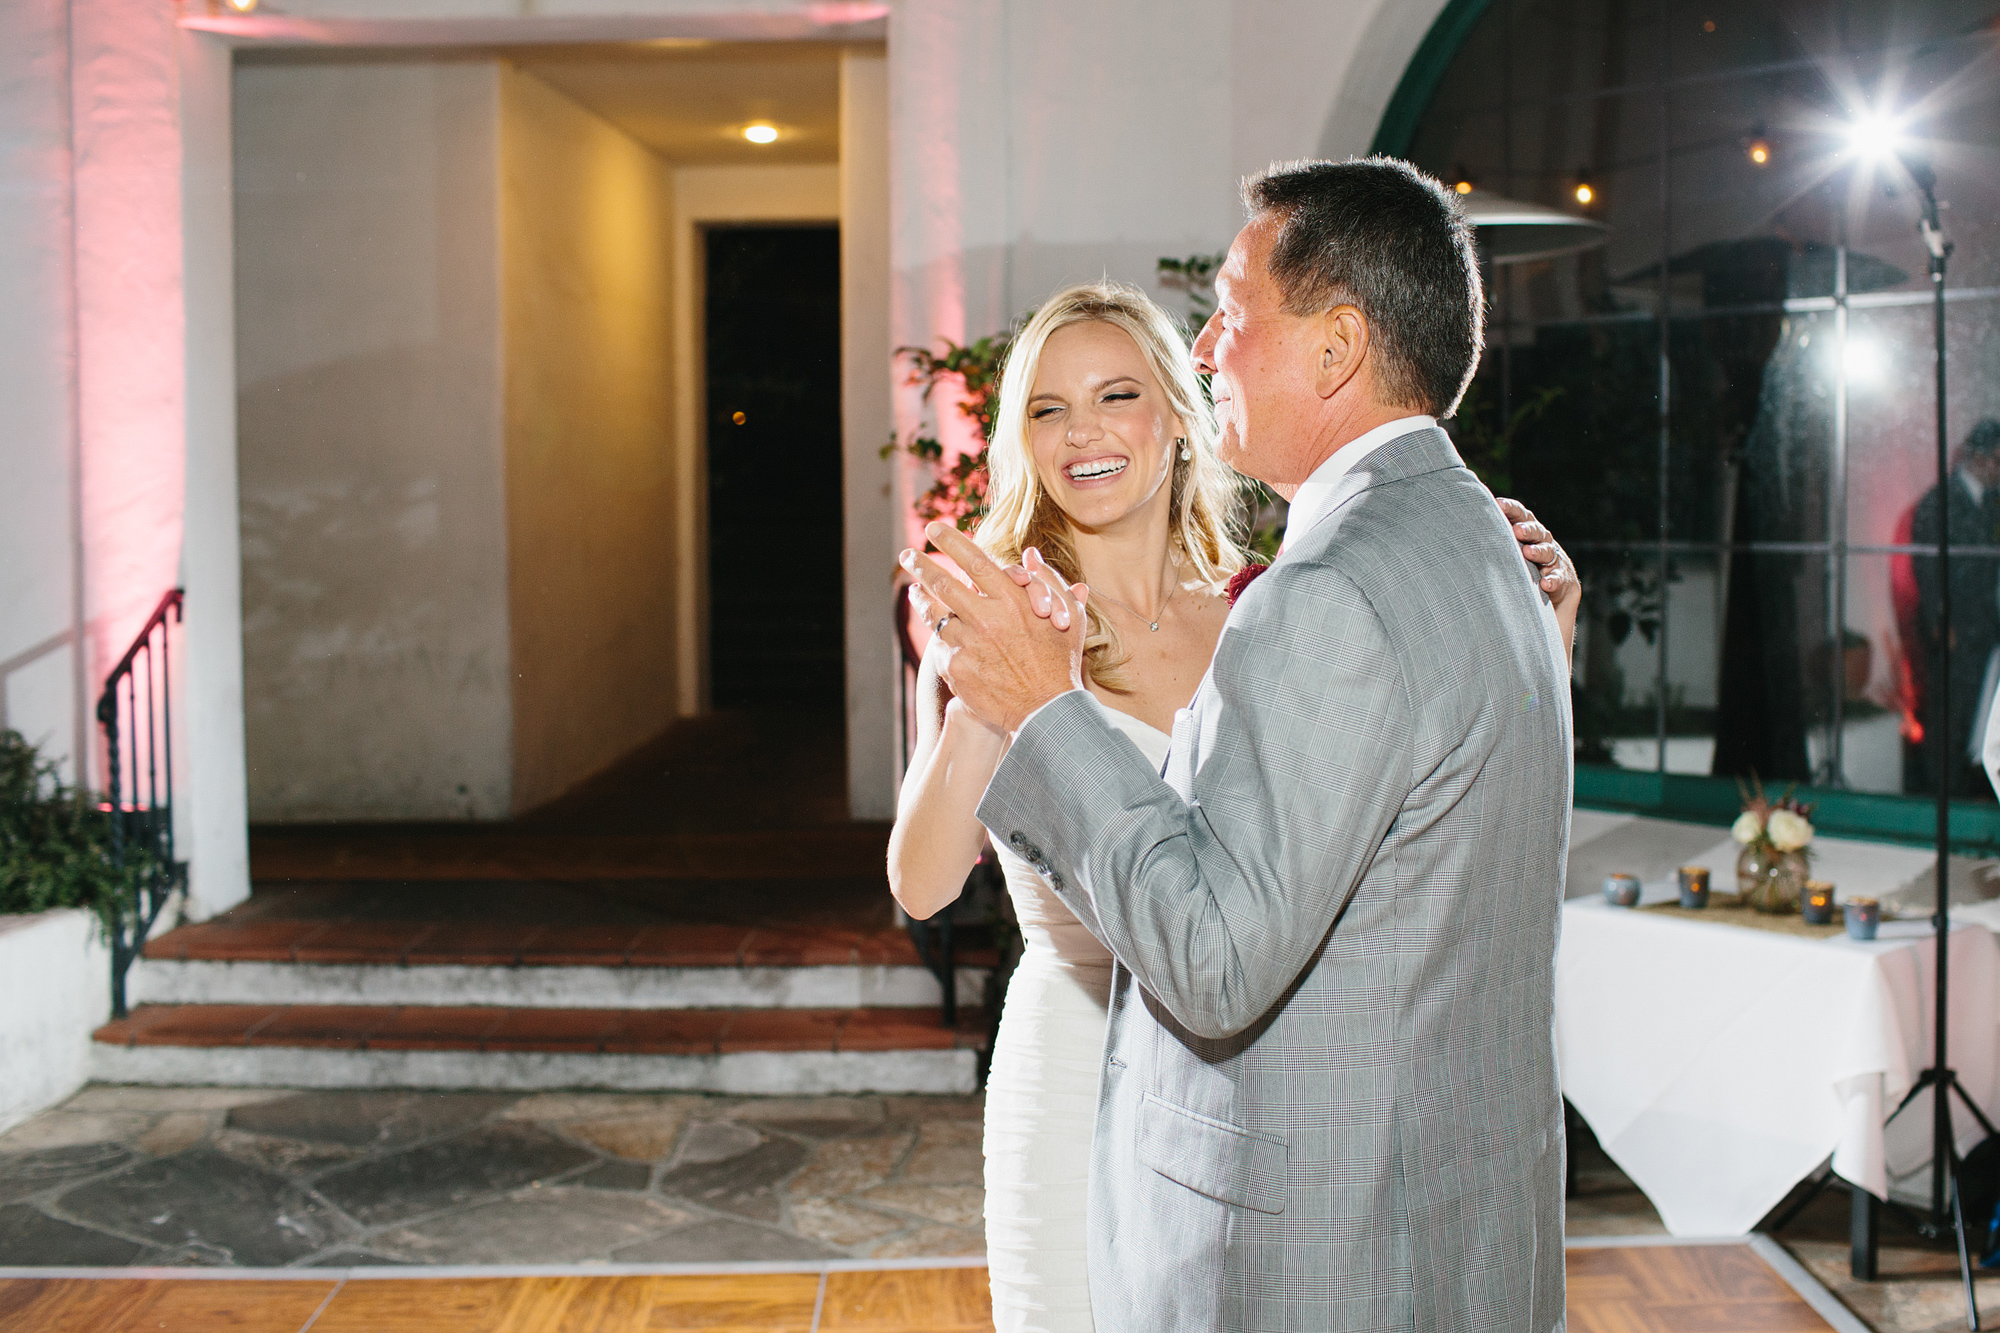 The bride had a special dance with her dad. 